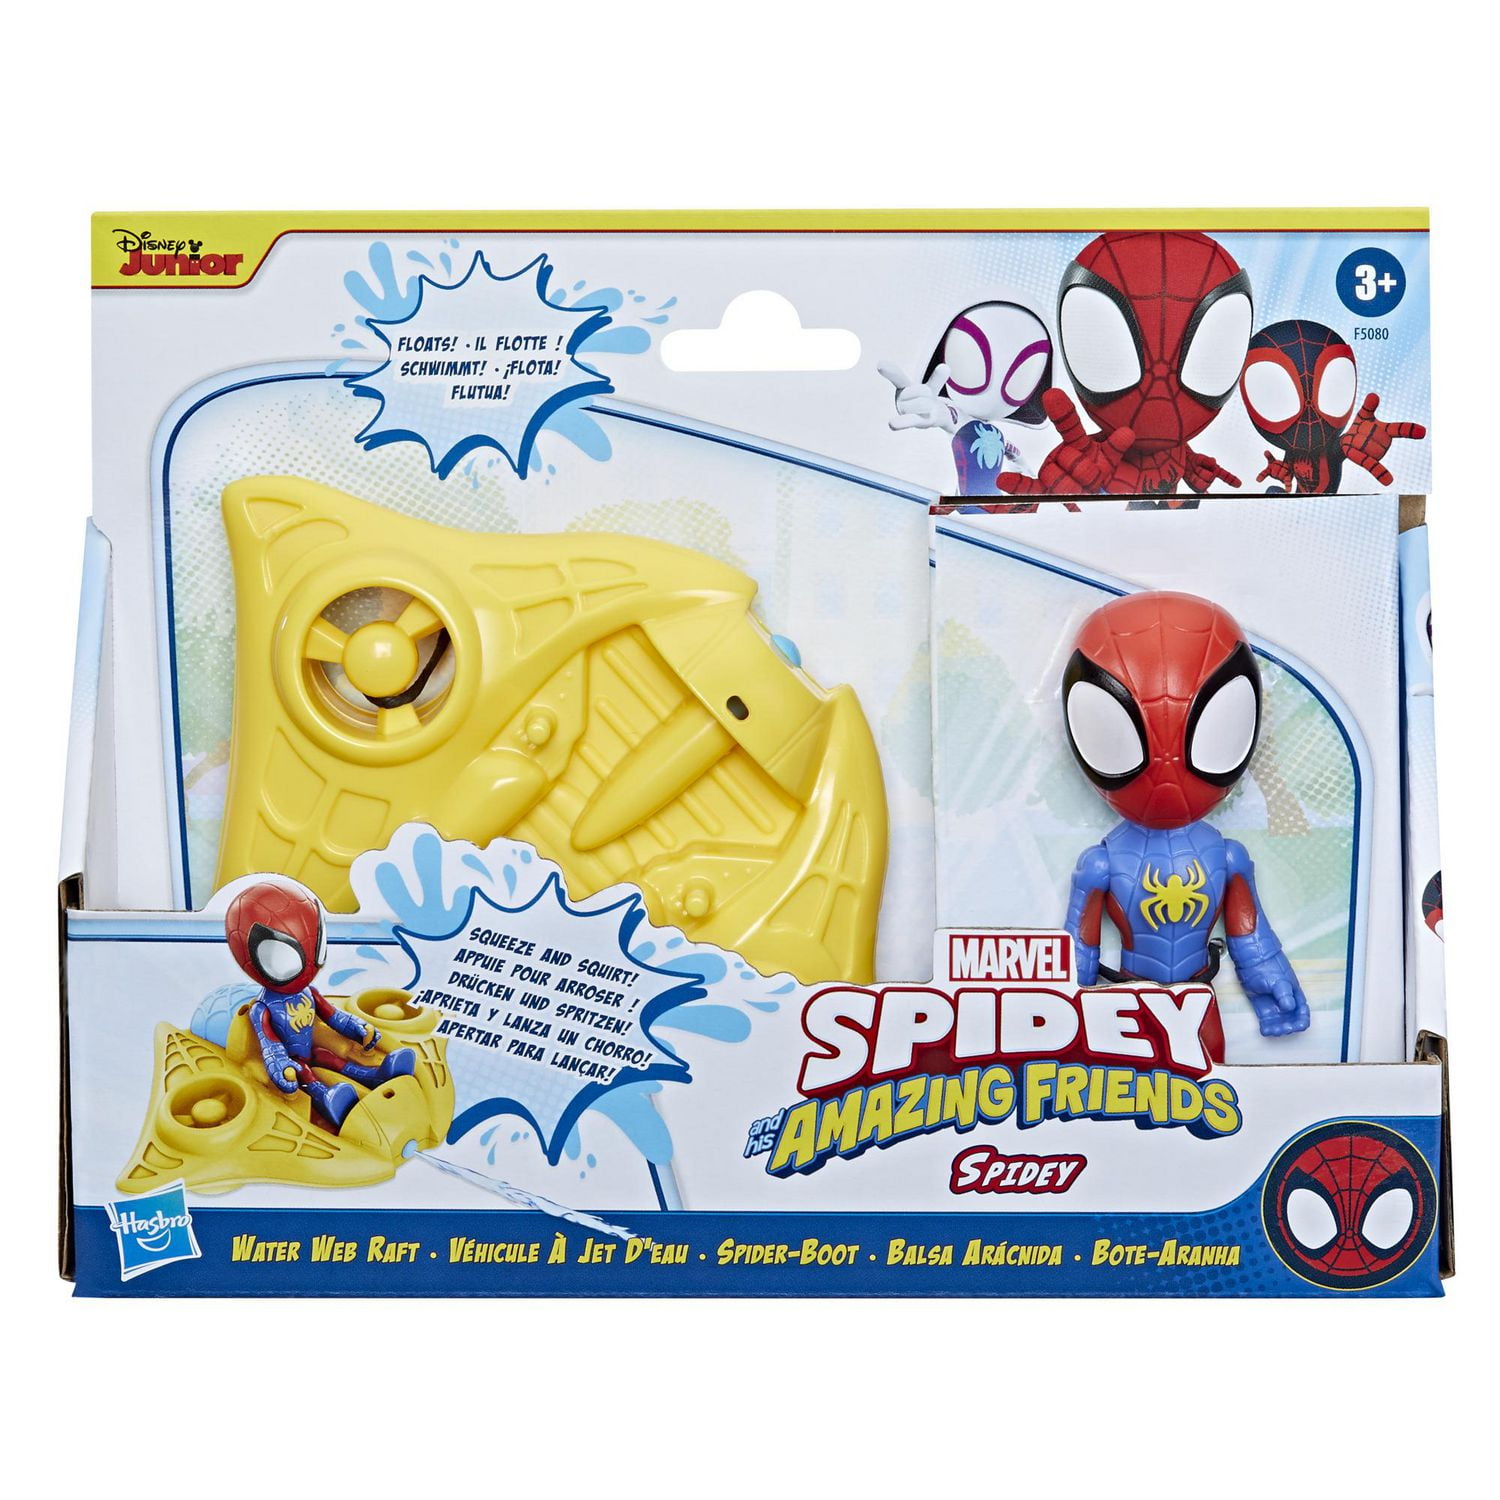 Marvel Spidey and His Amazing Friends Web Squad Figure Collection, Ages 3  and up 